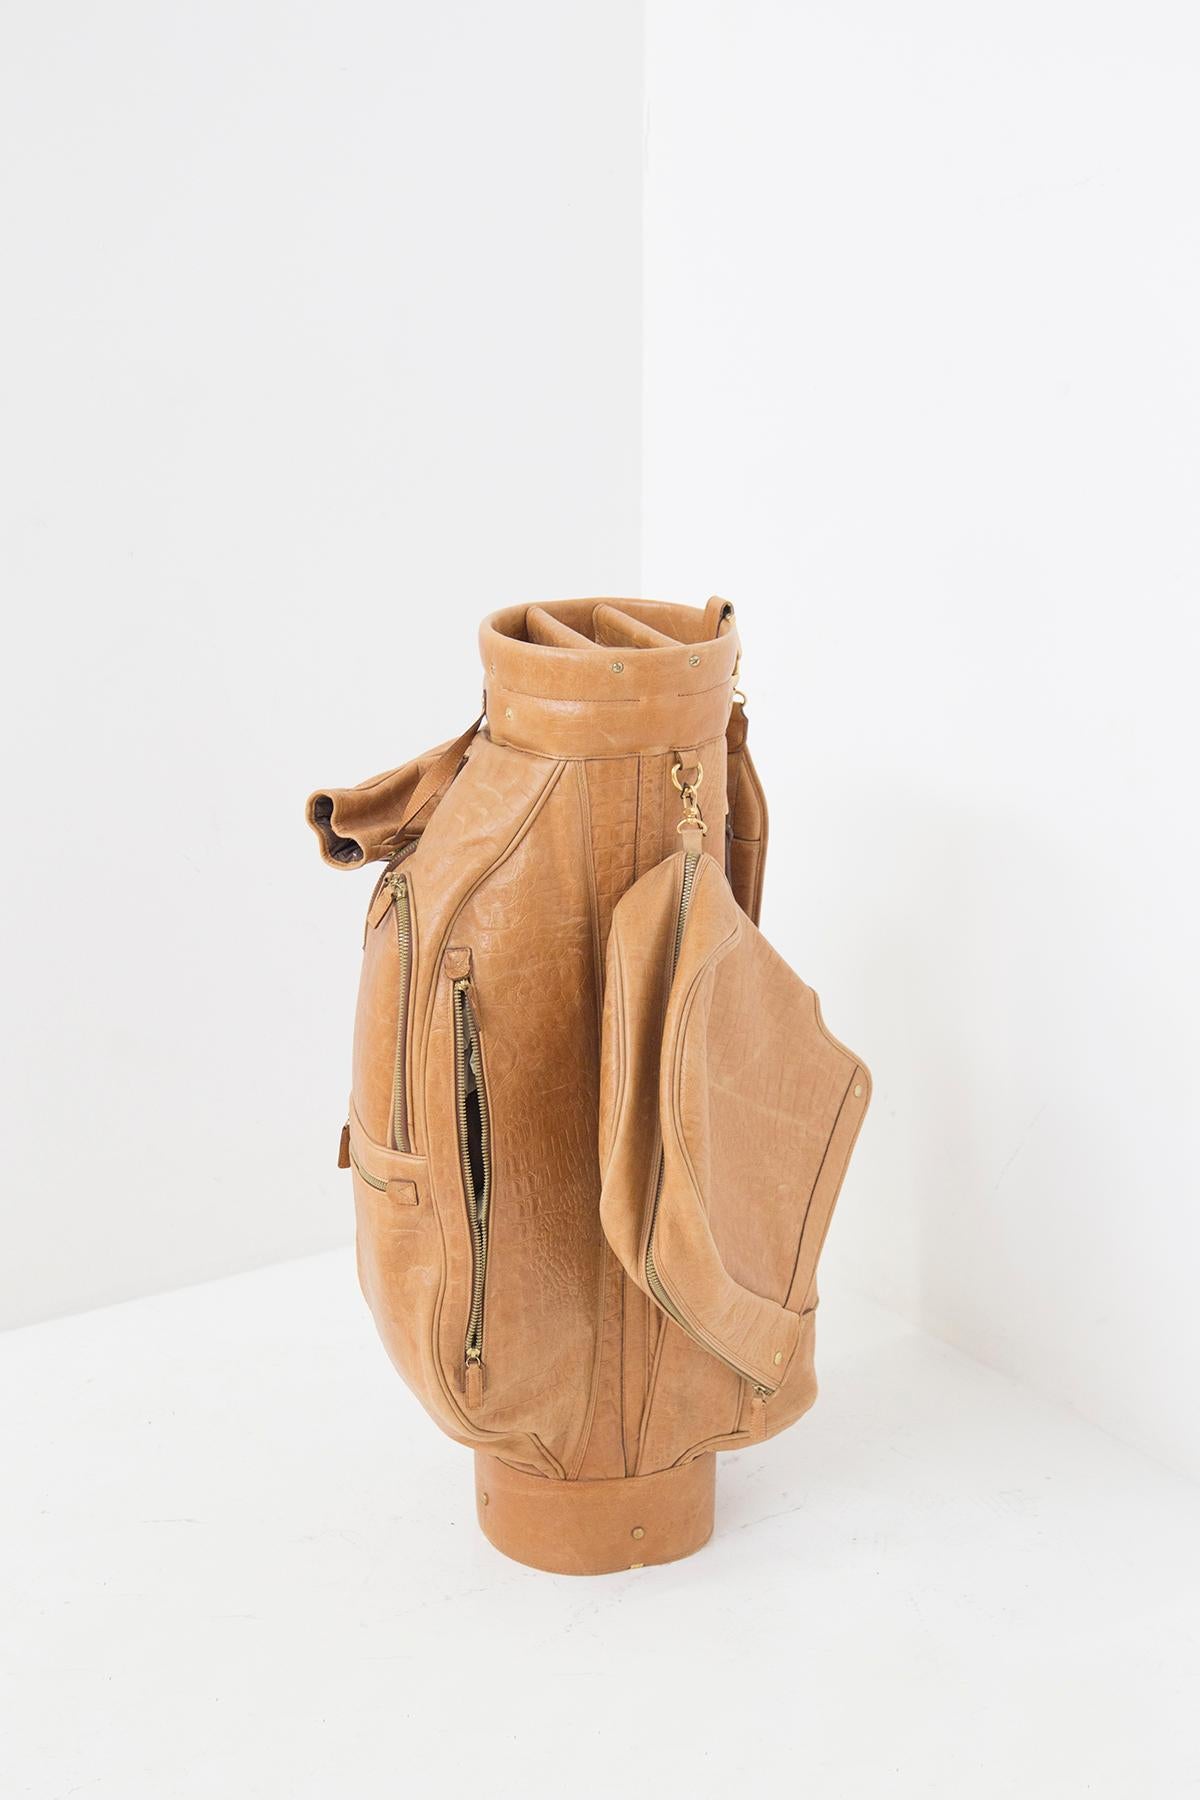 A beautiful golf bag for golf clubs made in the 1970s of the finest Italian manufacture.
The bag is made of camel-coloured faux reptile leather, which is simply fantastic.
The bag has many compartments and accessories. The central pivot base of the